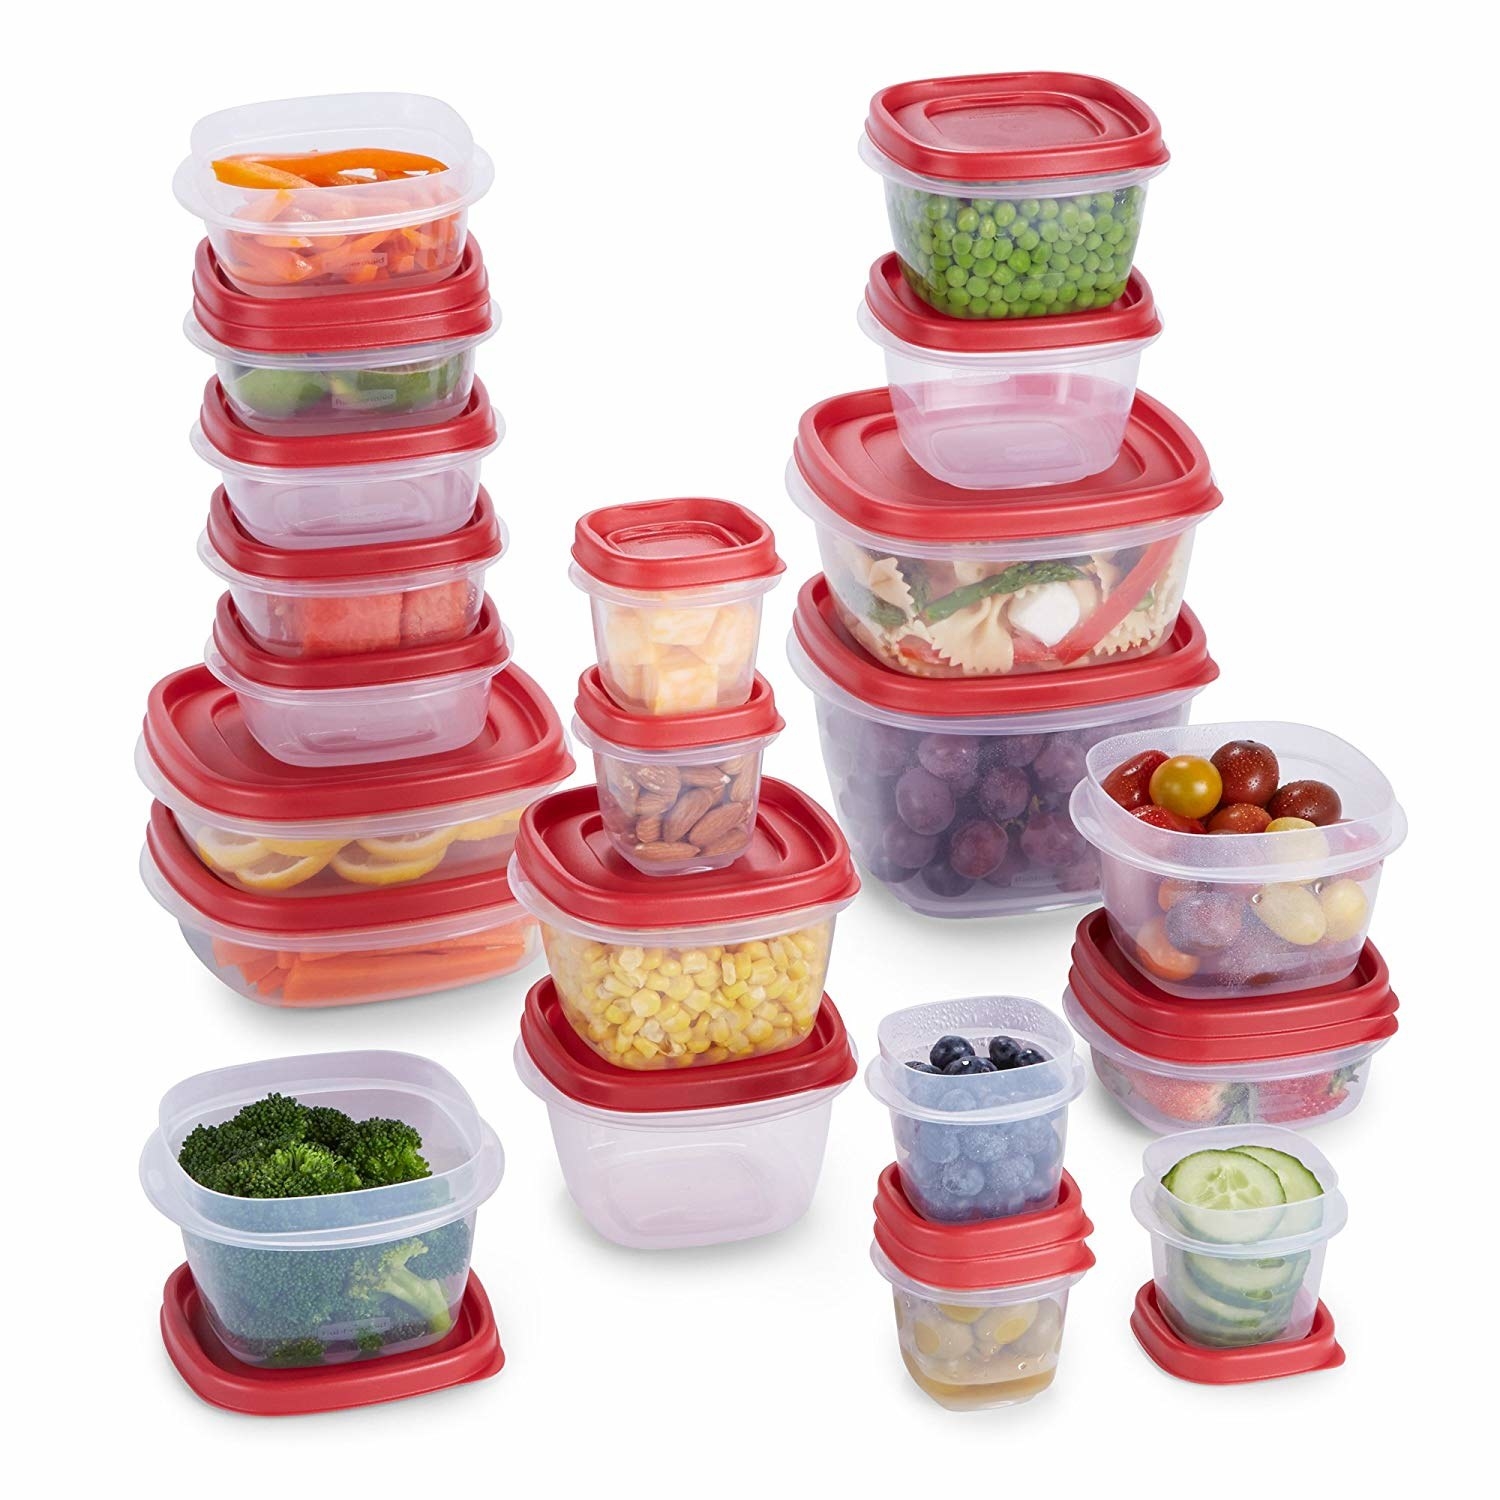 Rubbermaid Holiday TakeAlongs Egg Keeper Food Storage Container